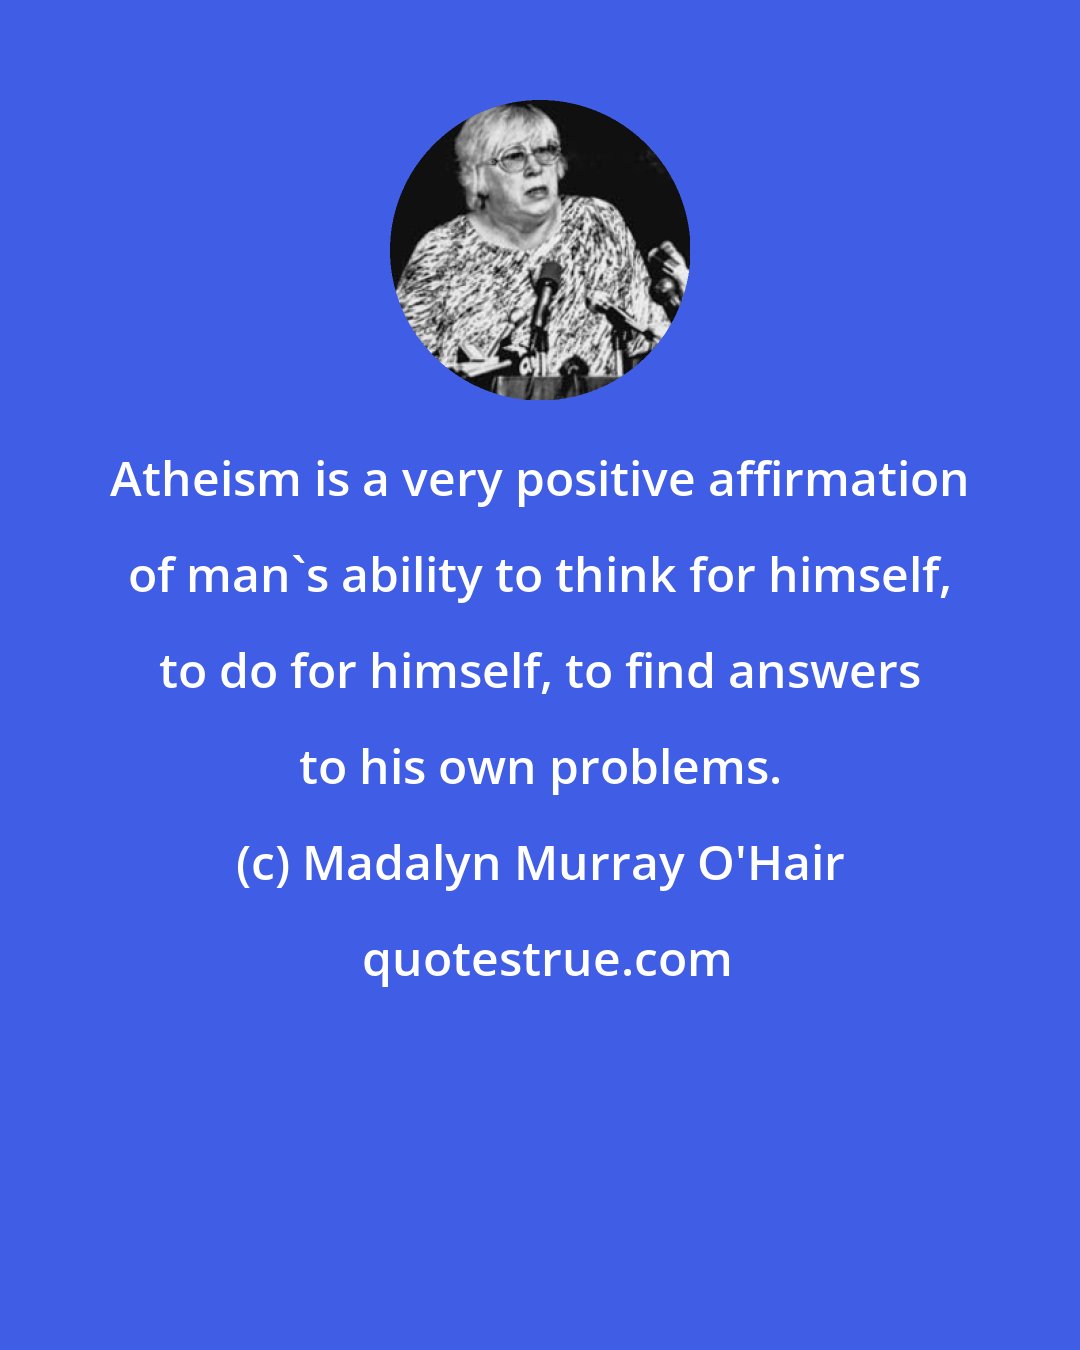 Madalyn Murray O'Hair: Atheism is a very positive affirmation of man's ability to think for himself, to do for himself, to find answers to his own problems.